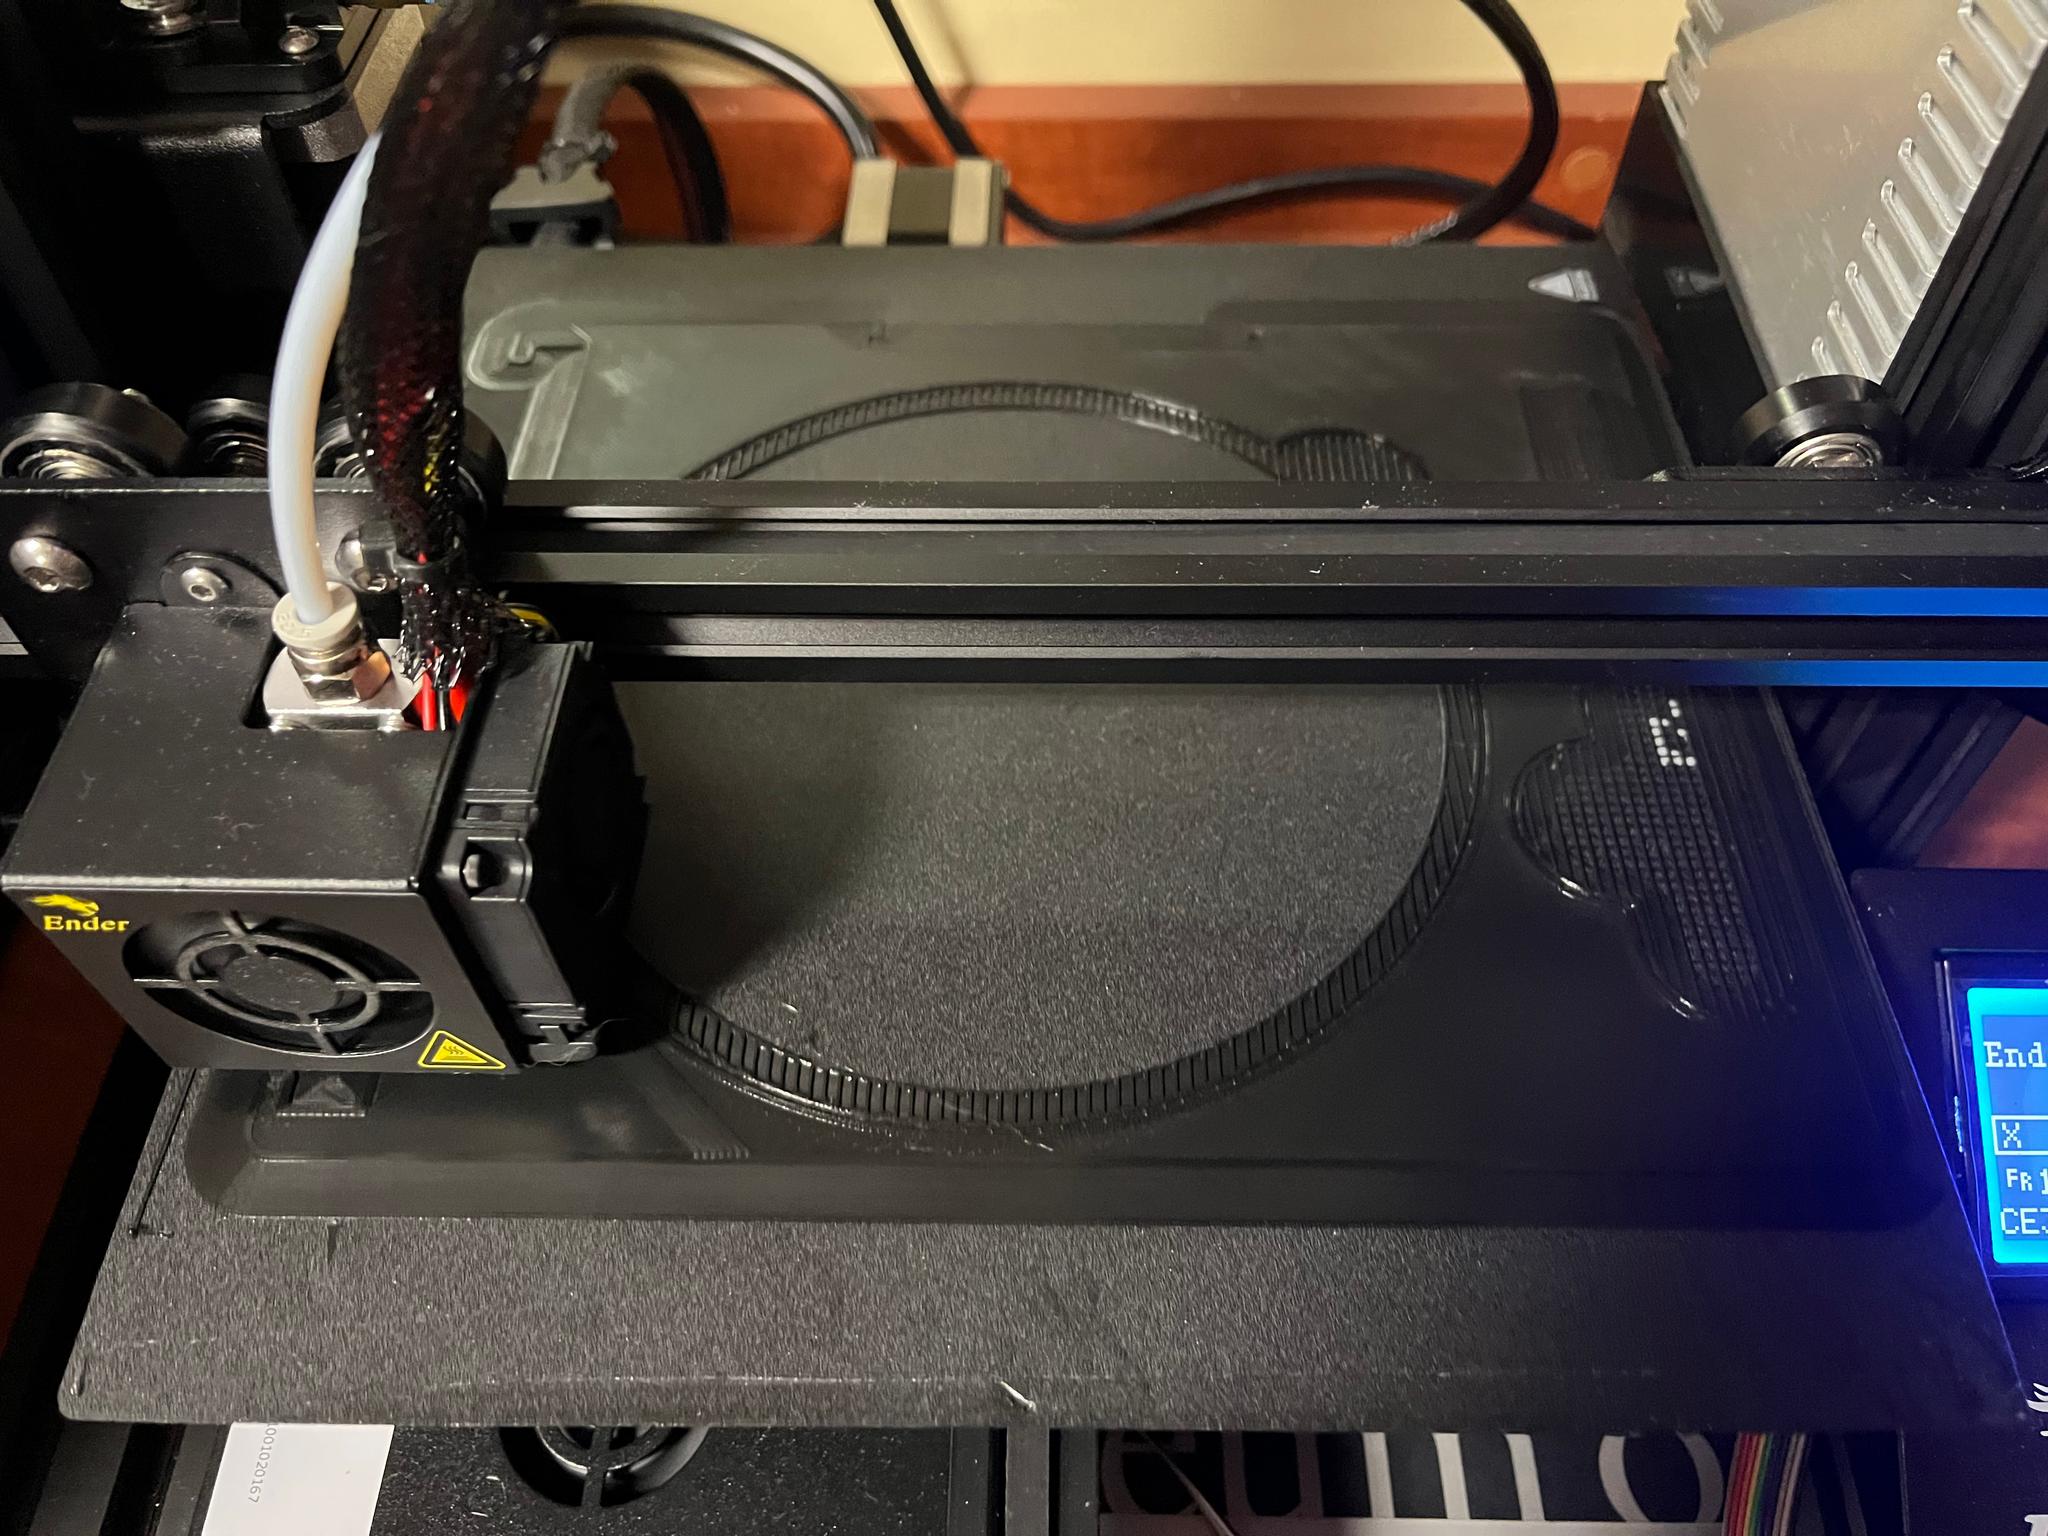 Beginning stage of print on magnetic print bed.